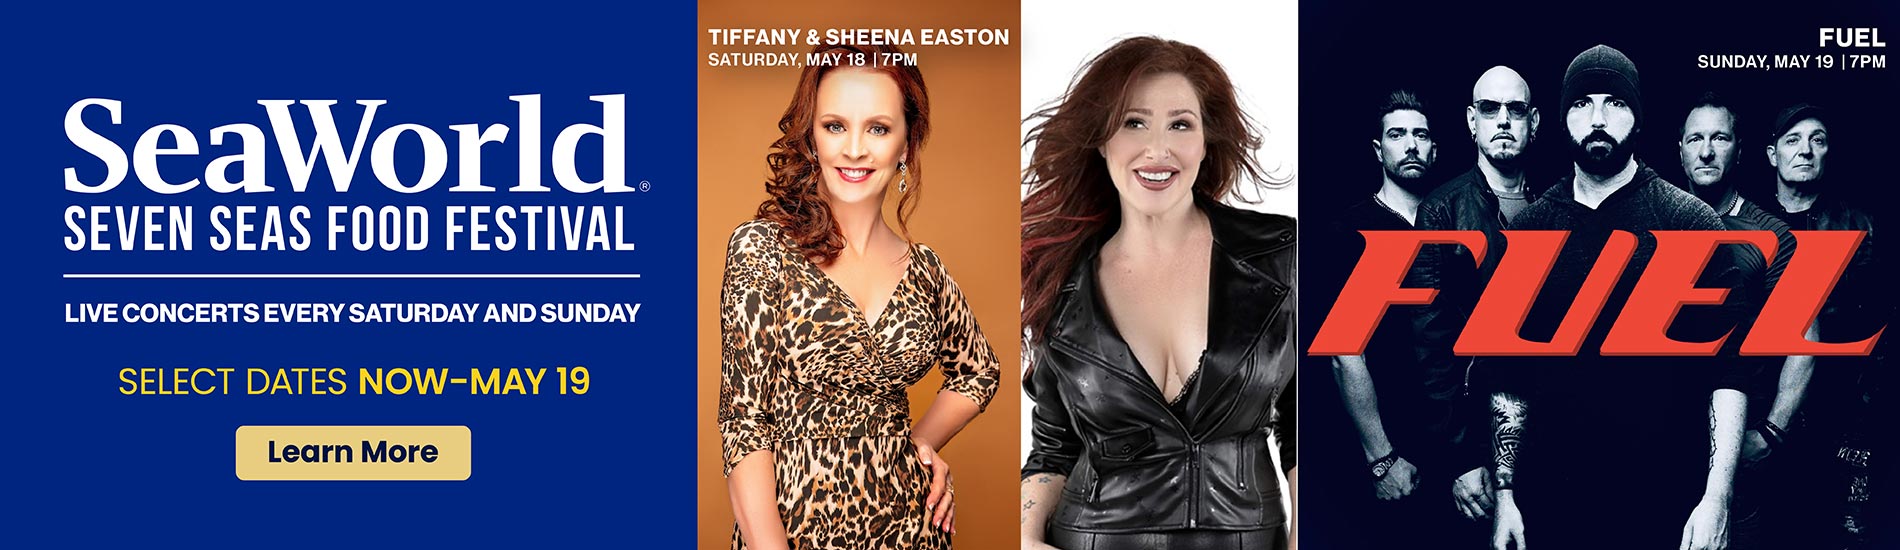 Tiffany and Sheena Easton and Fuel performing at SeaWorld Seven Seas event